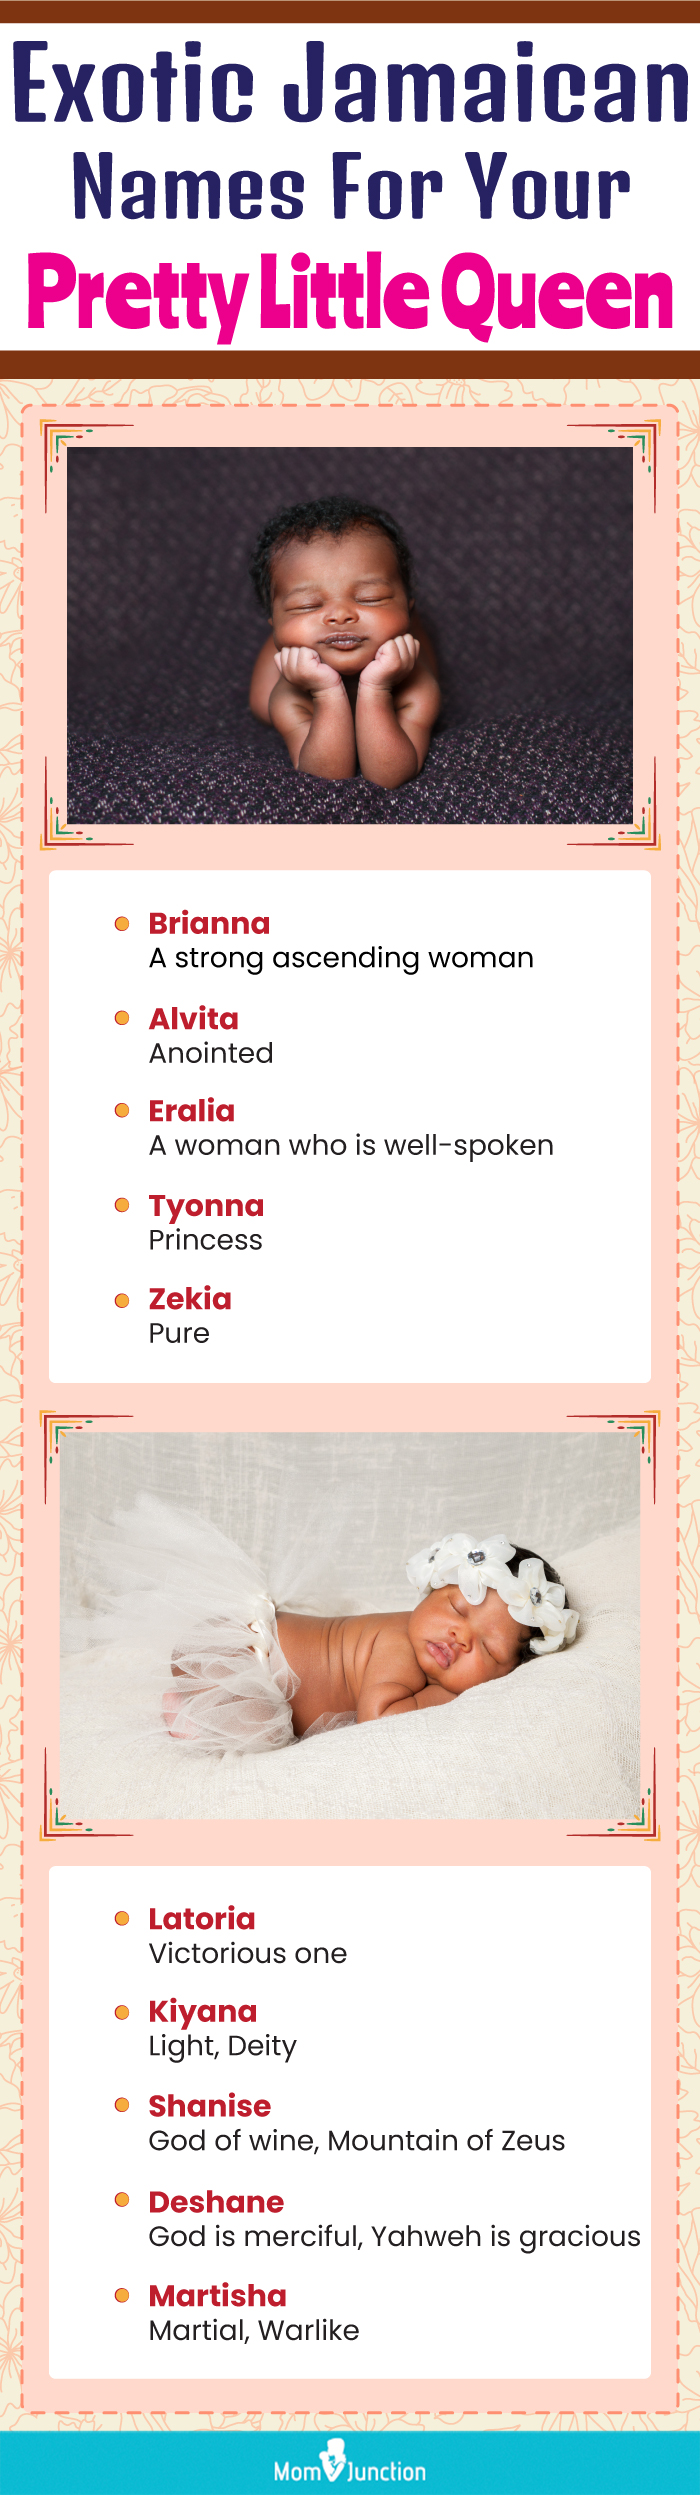 exotic jamaican names for your pretty little queen (infographic)